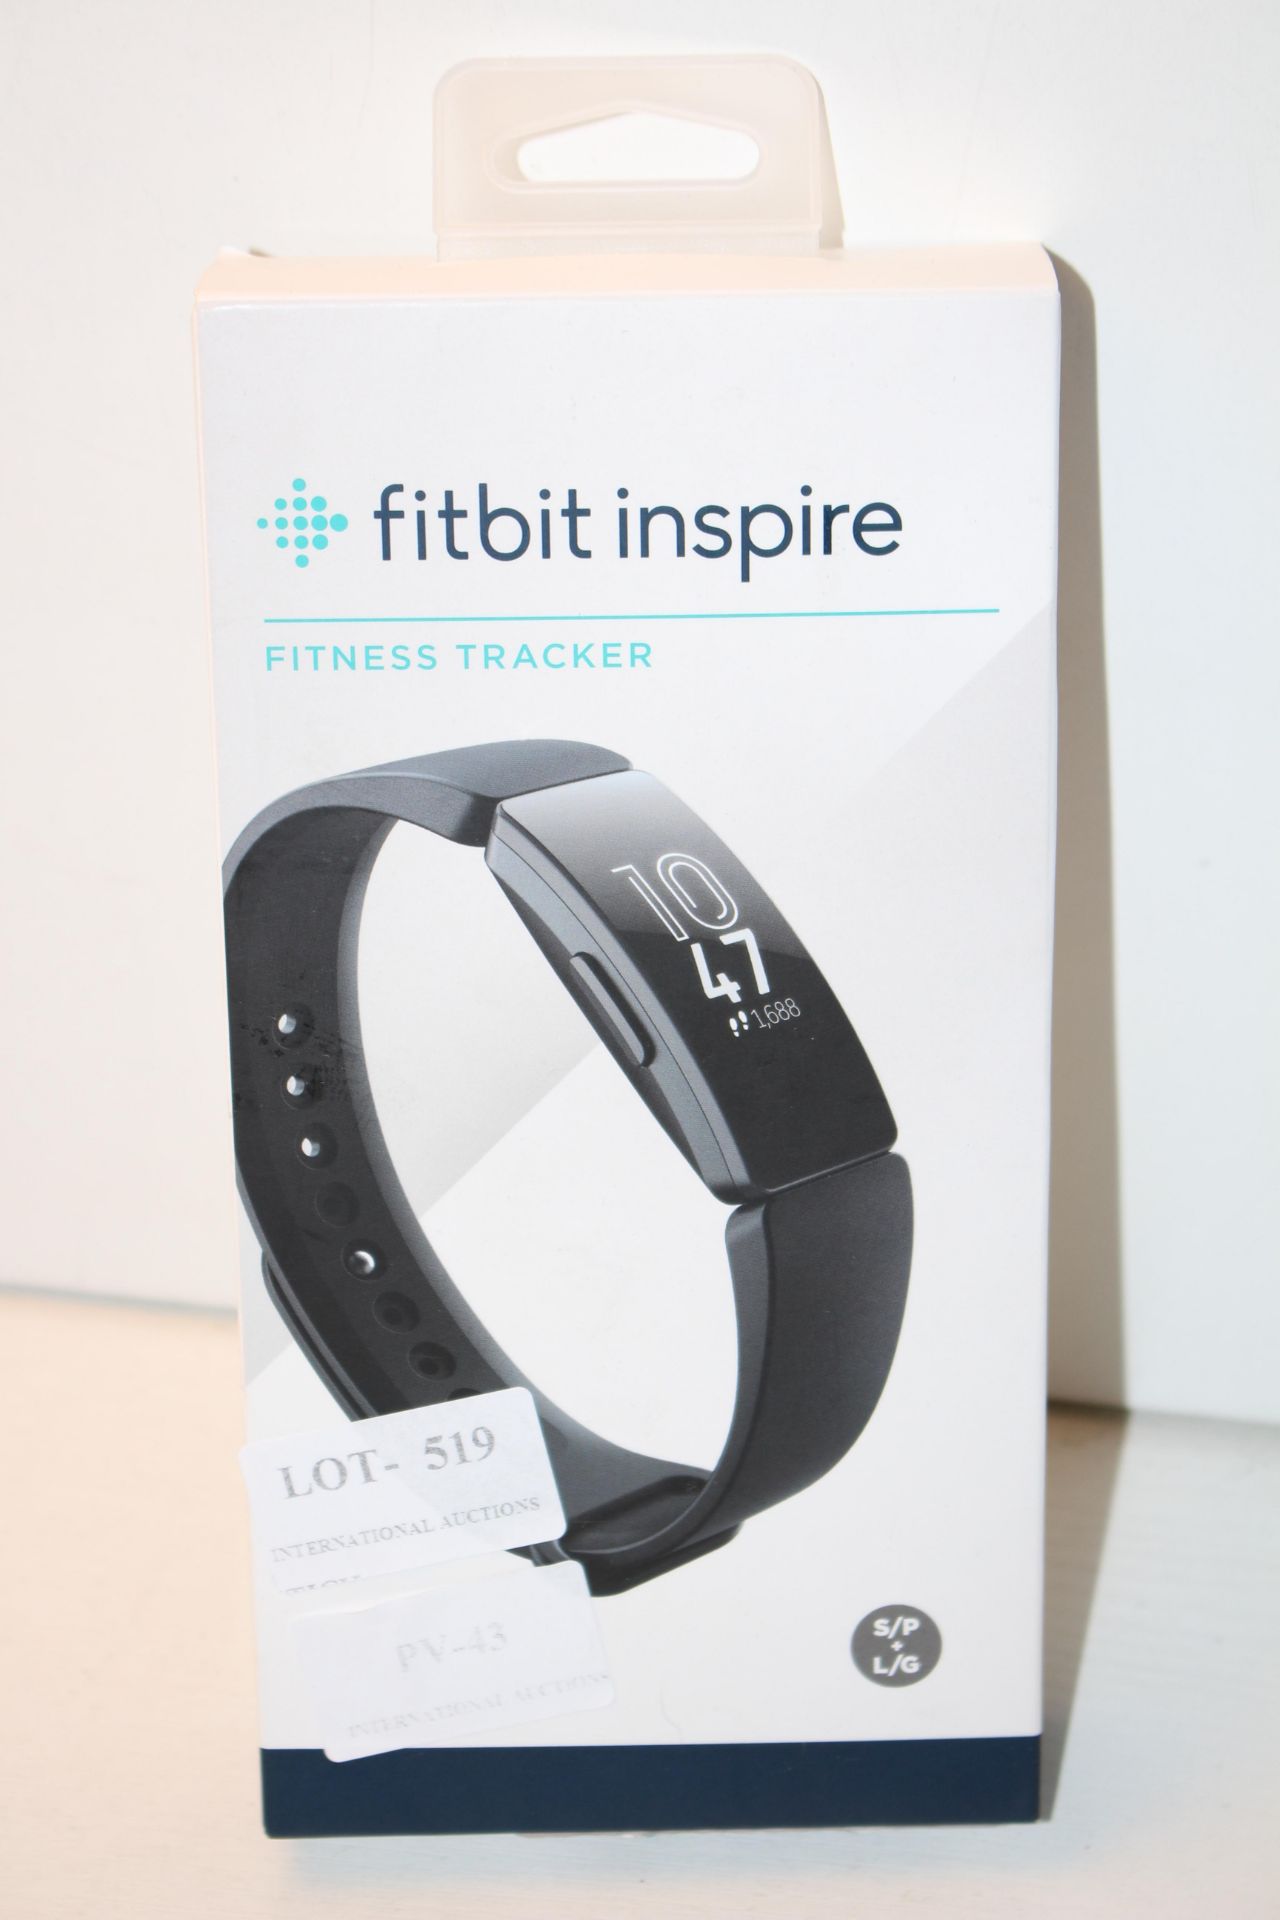 BOXED FITBIT INSPIRE FITNESS TRACKER RRP £49.99Condition ReportAppraisal Available on Request- All